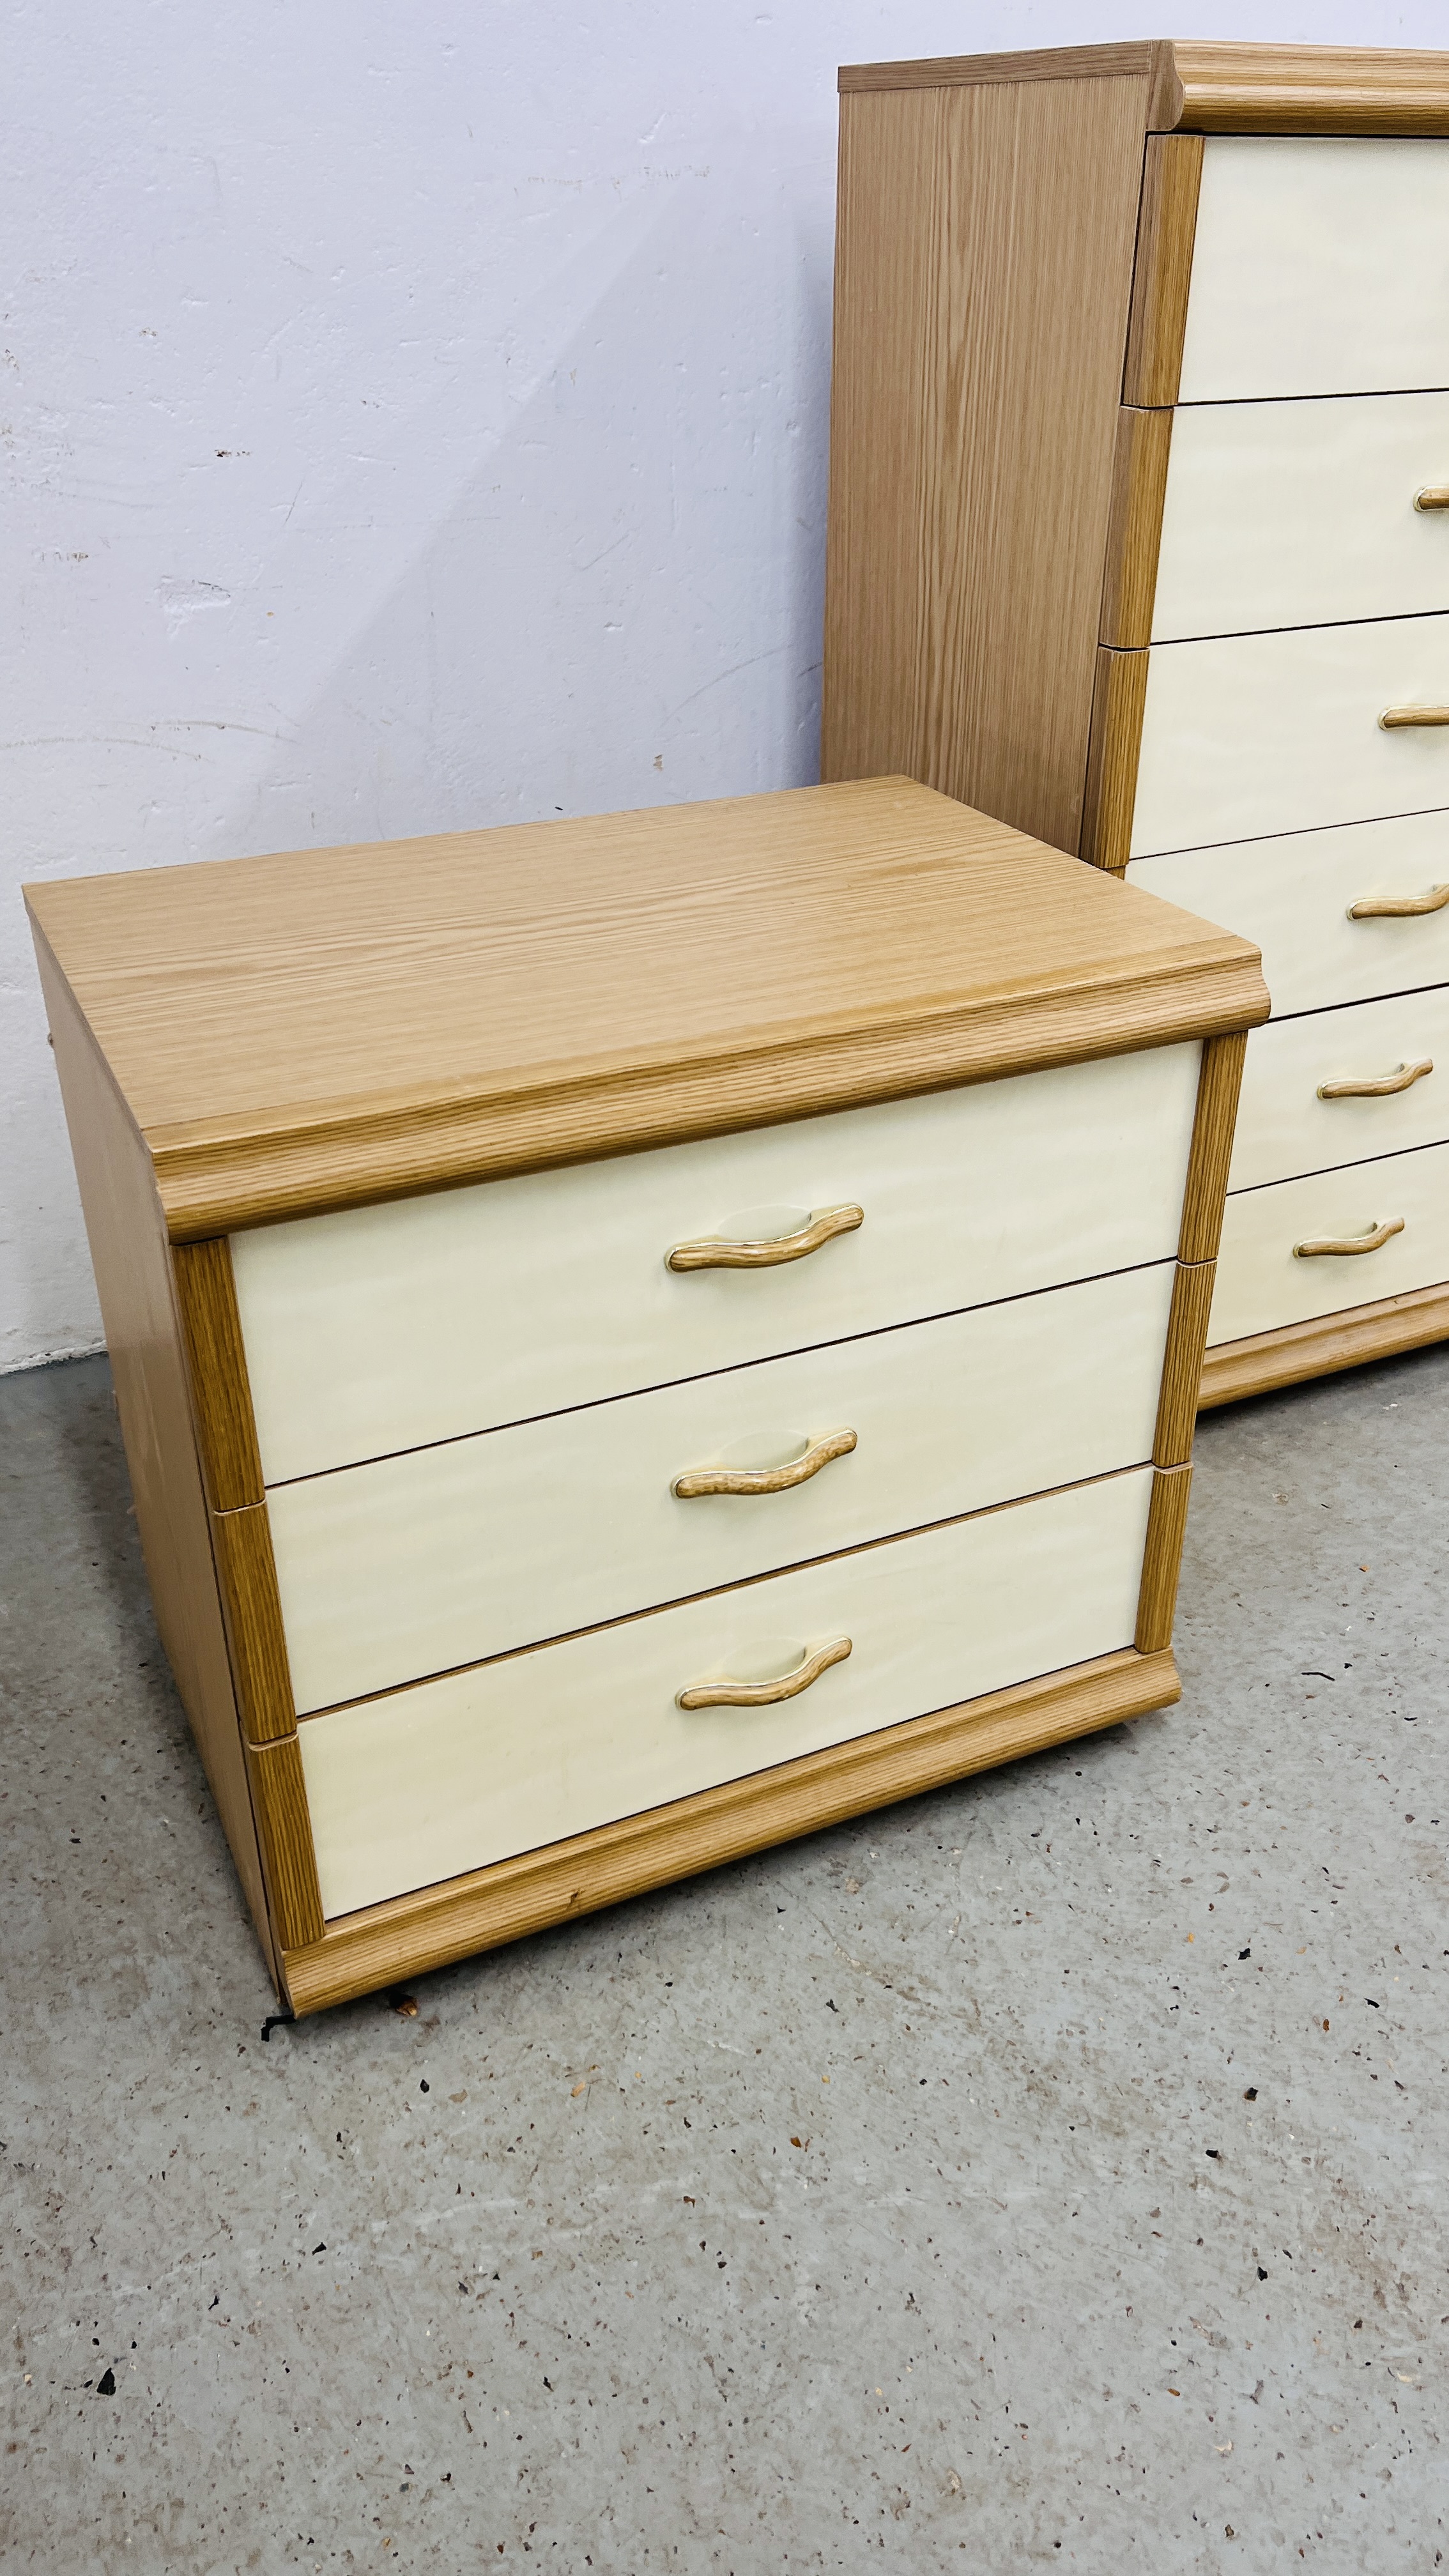 MODERN 6 DRAWER BEDROOM CHEST - W 60CM X D 42CM X H 100CM ALONG WTH A MATCHING BEDSIDE 3 DRAWER - Image 2 of 7